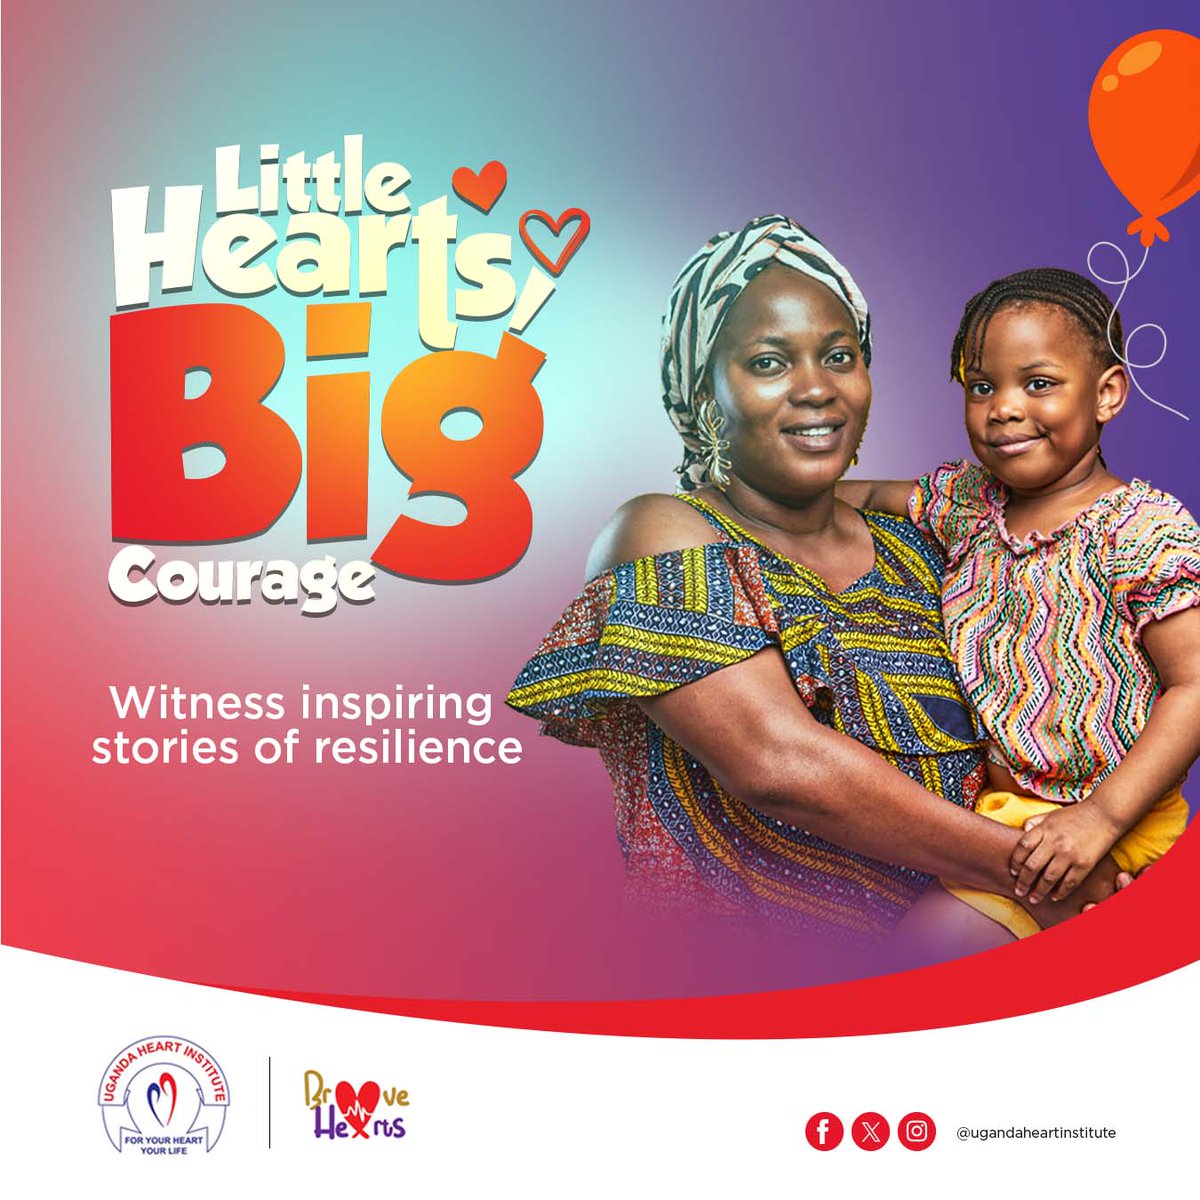 Join us in celebrating the indomitable spirit of our young heart warriors at the Brave Hearts Event! 🌟 Today, we share stories of courage and triumph that inspire us all. #LittleHeartsBigCourage #UHIBraveHearts